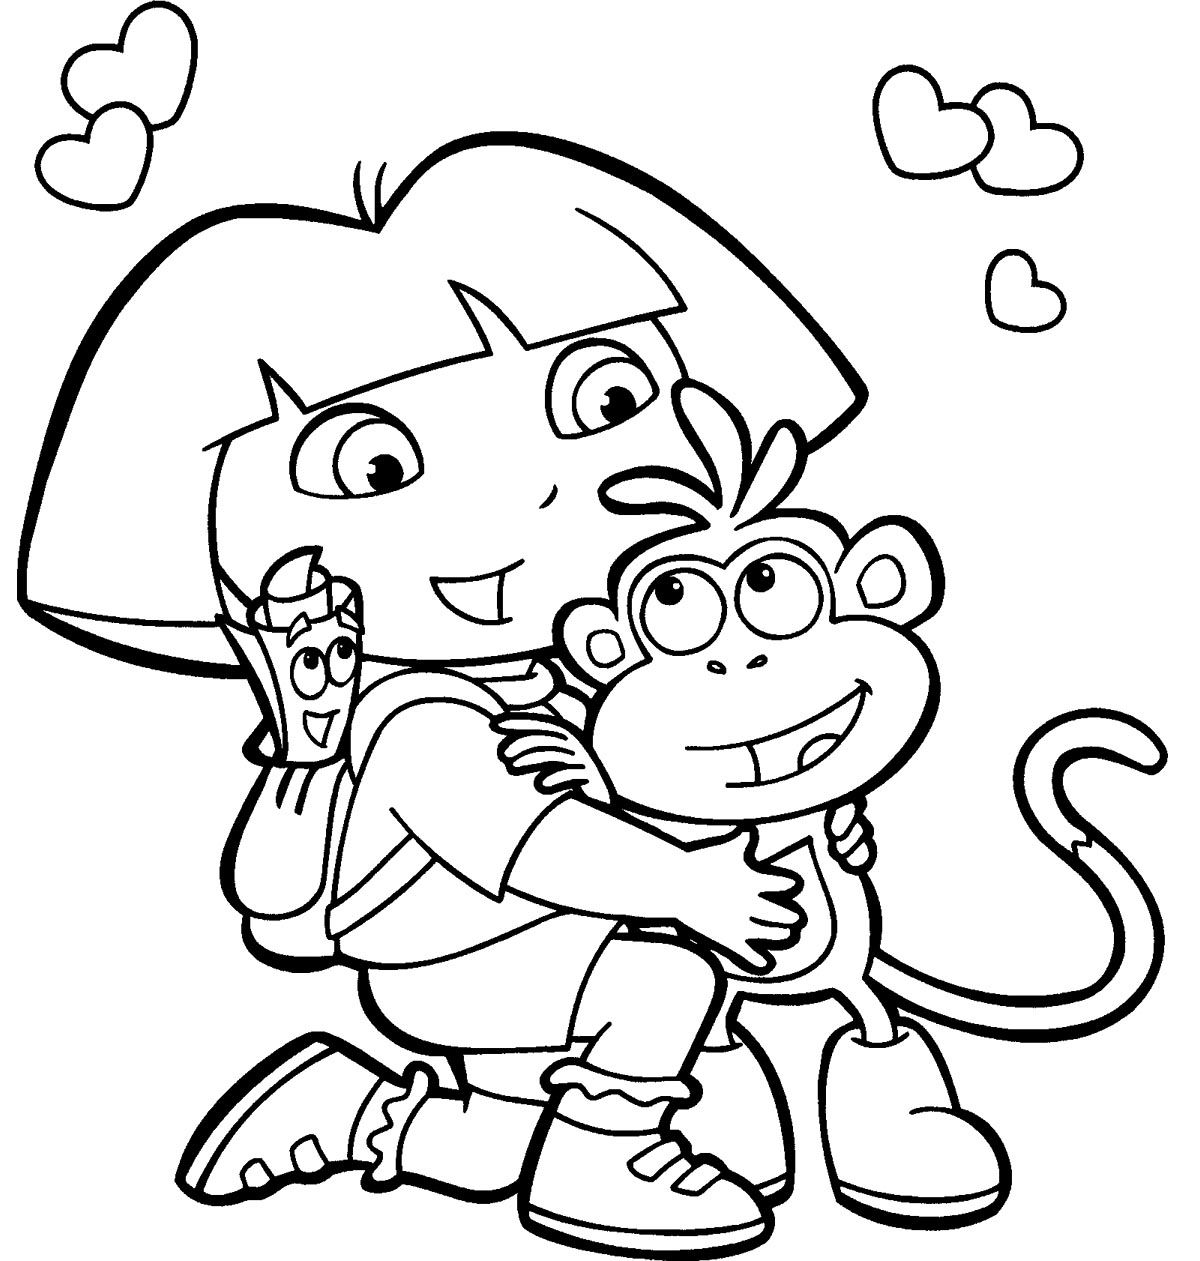 printable dora pictures free printable dora the explorer coloring pages for kids dora pictures printable 